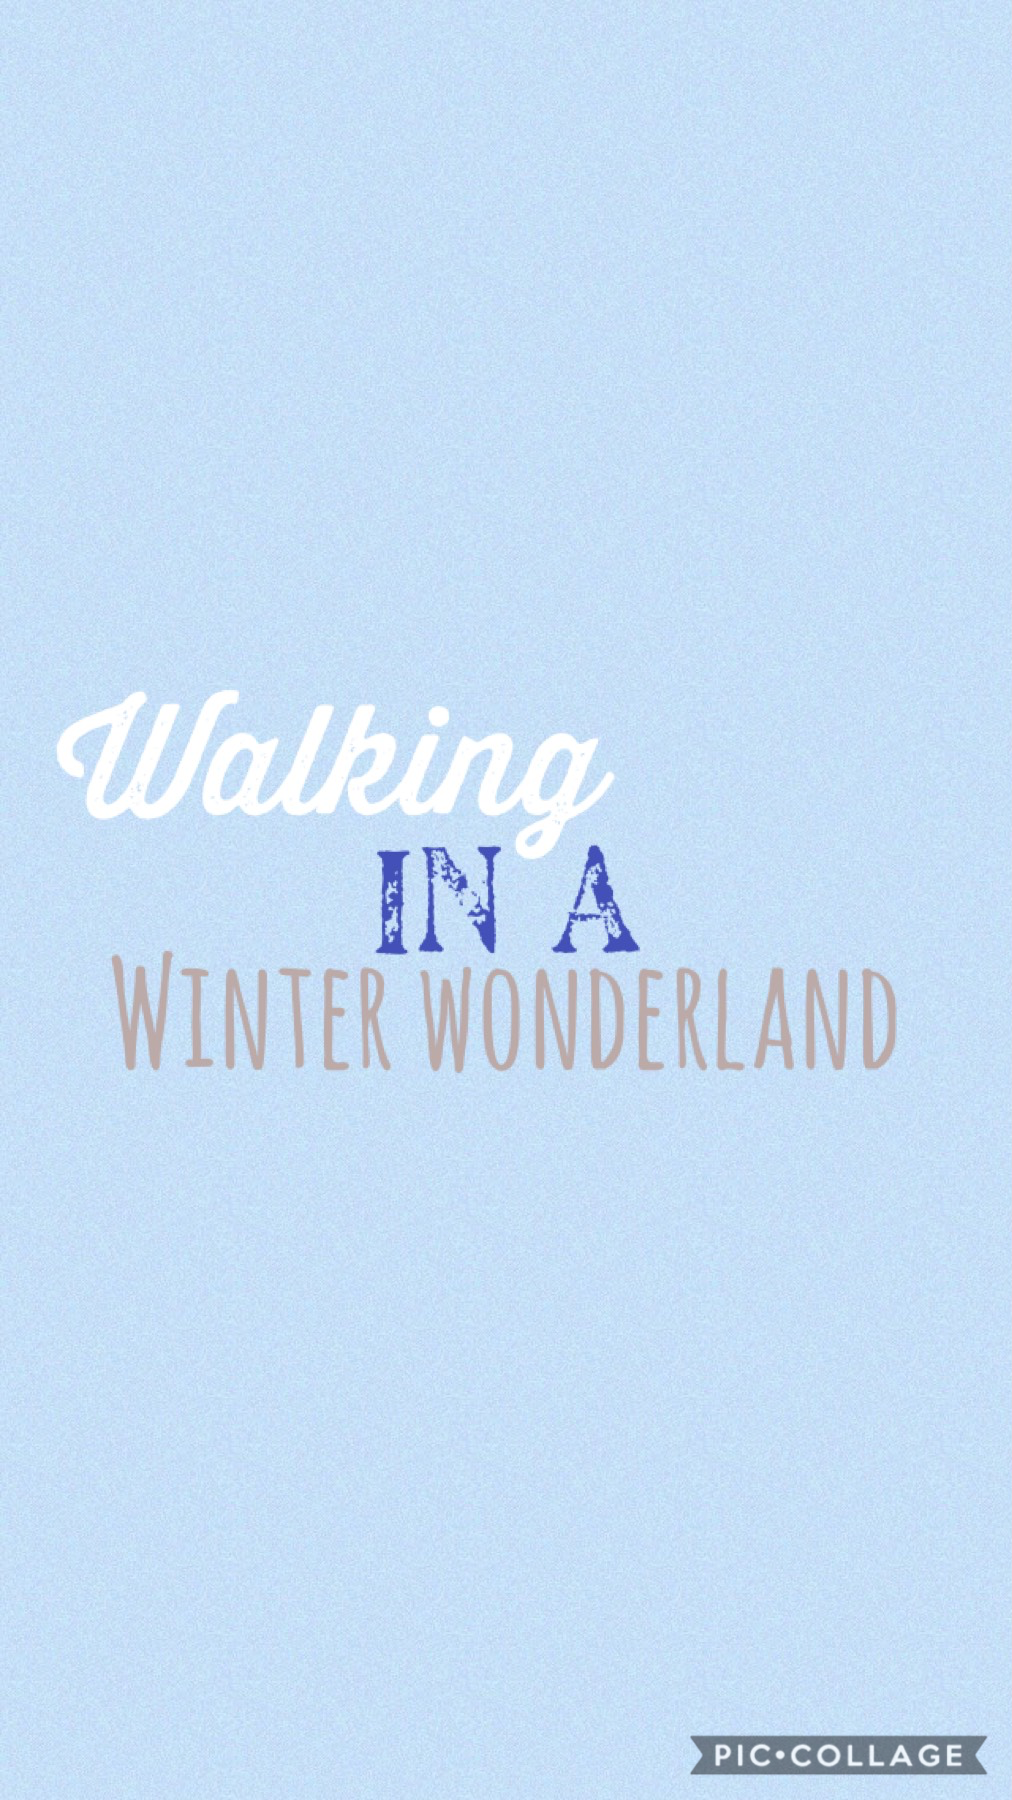 ❄️Tap💕
New theme! Ik this is kinda ugly, but it’s only so I can announce my new theme, which is winter/Christmas  🎄❄️